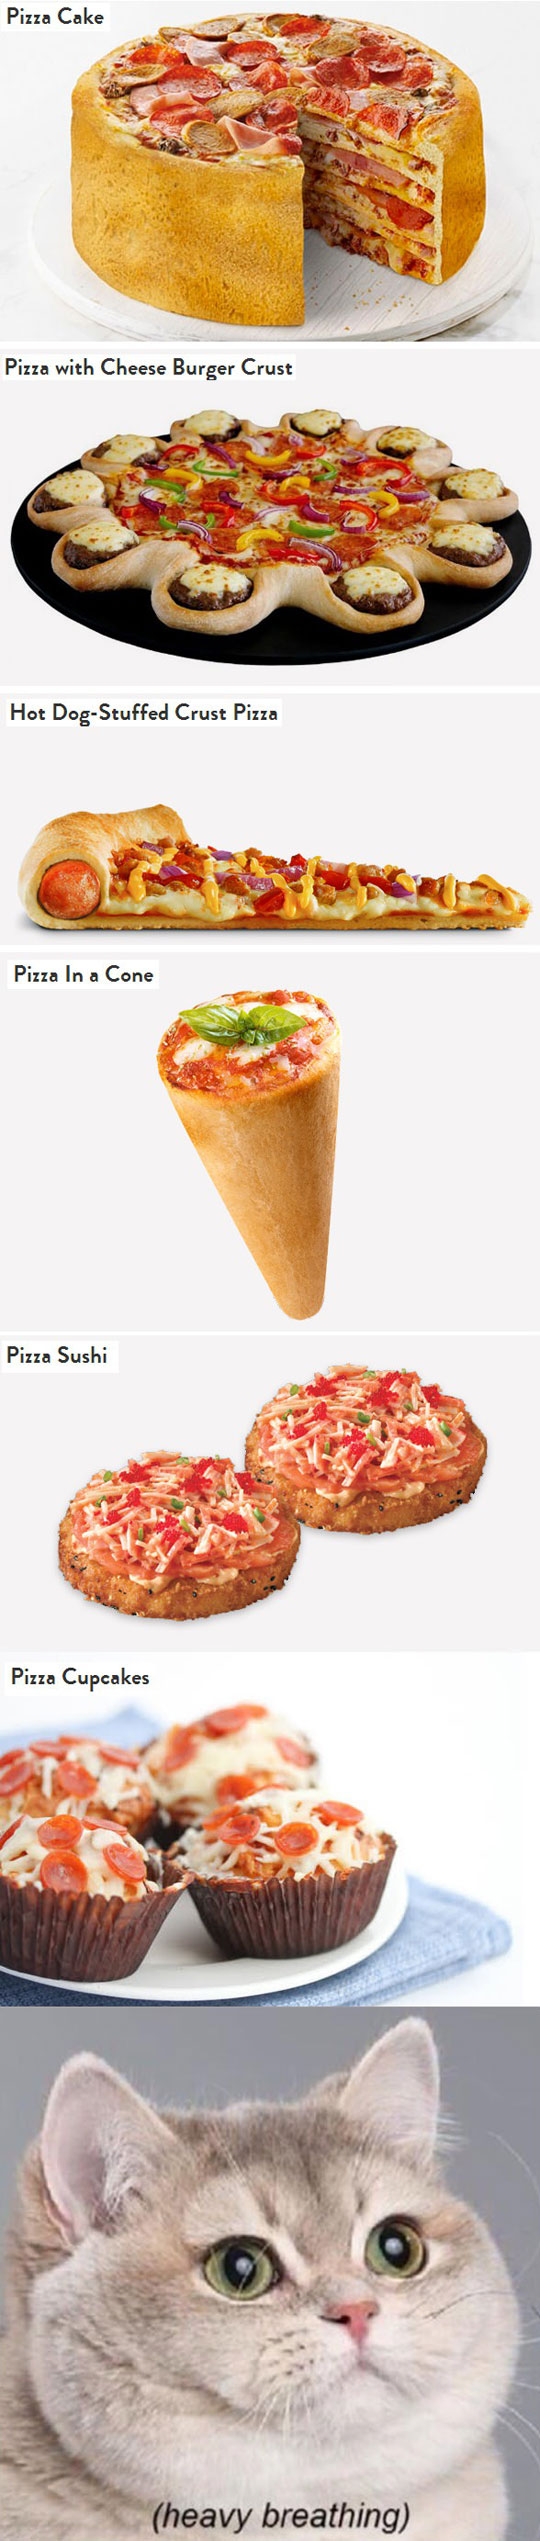 food-pizza-sushi-cone